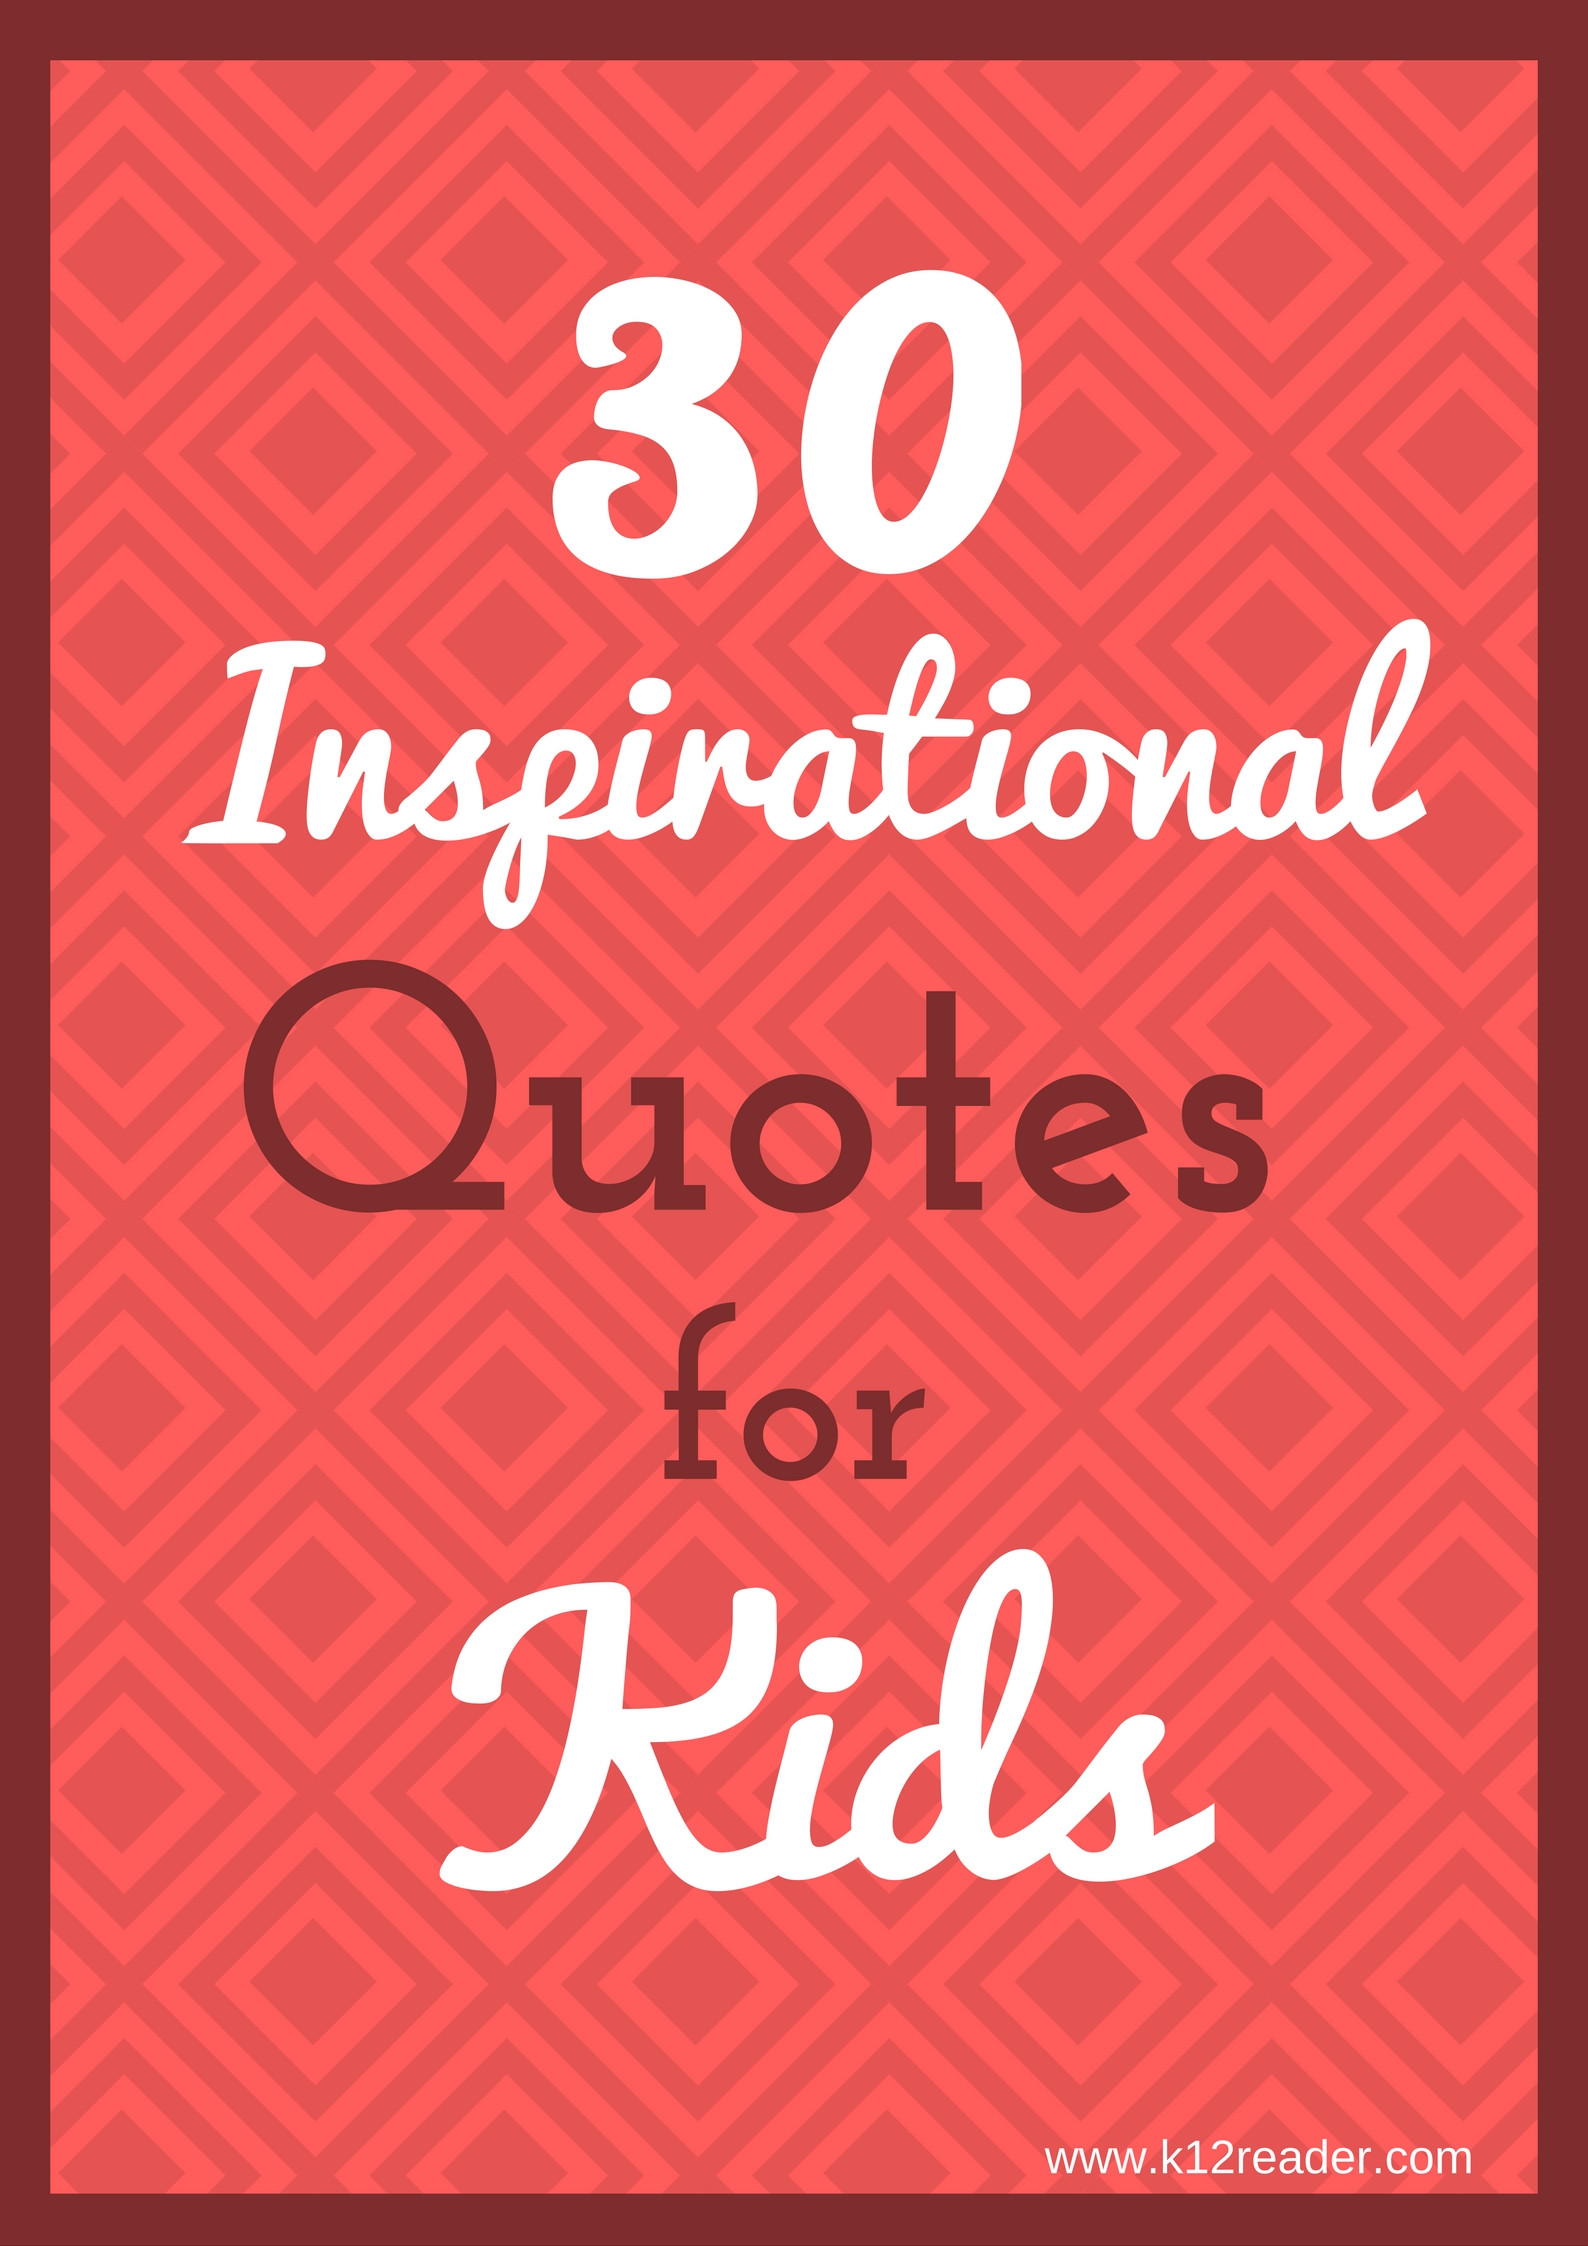 Inspirational Quotes For Children
 30 Inspirational Quotes for Kids